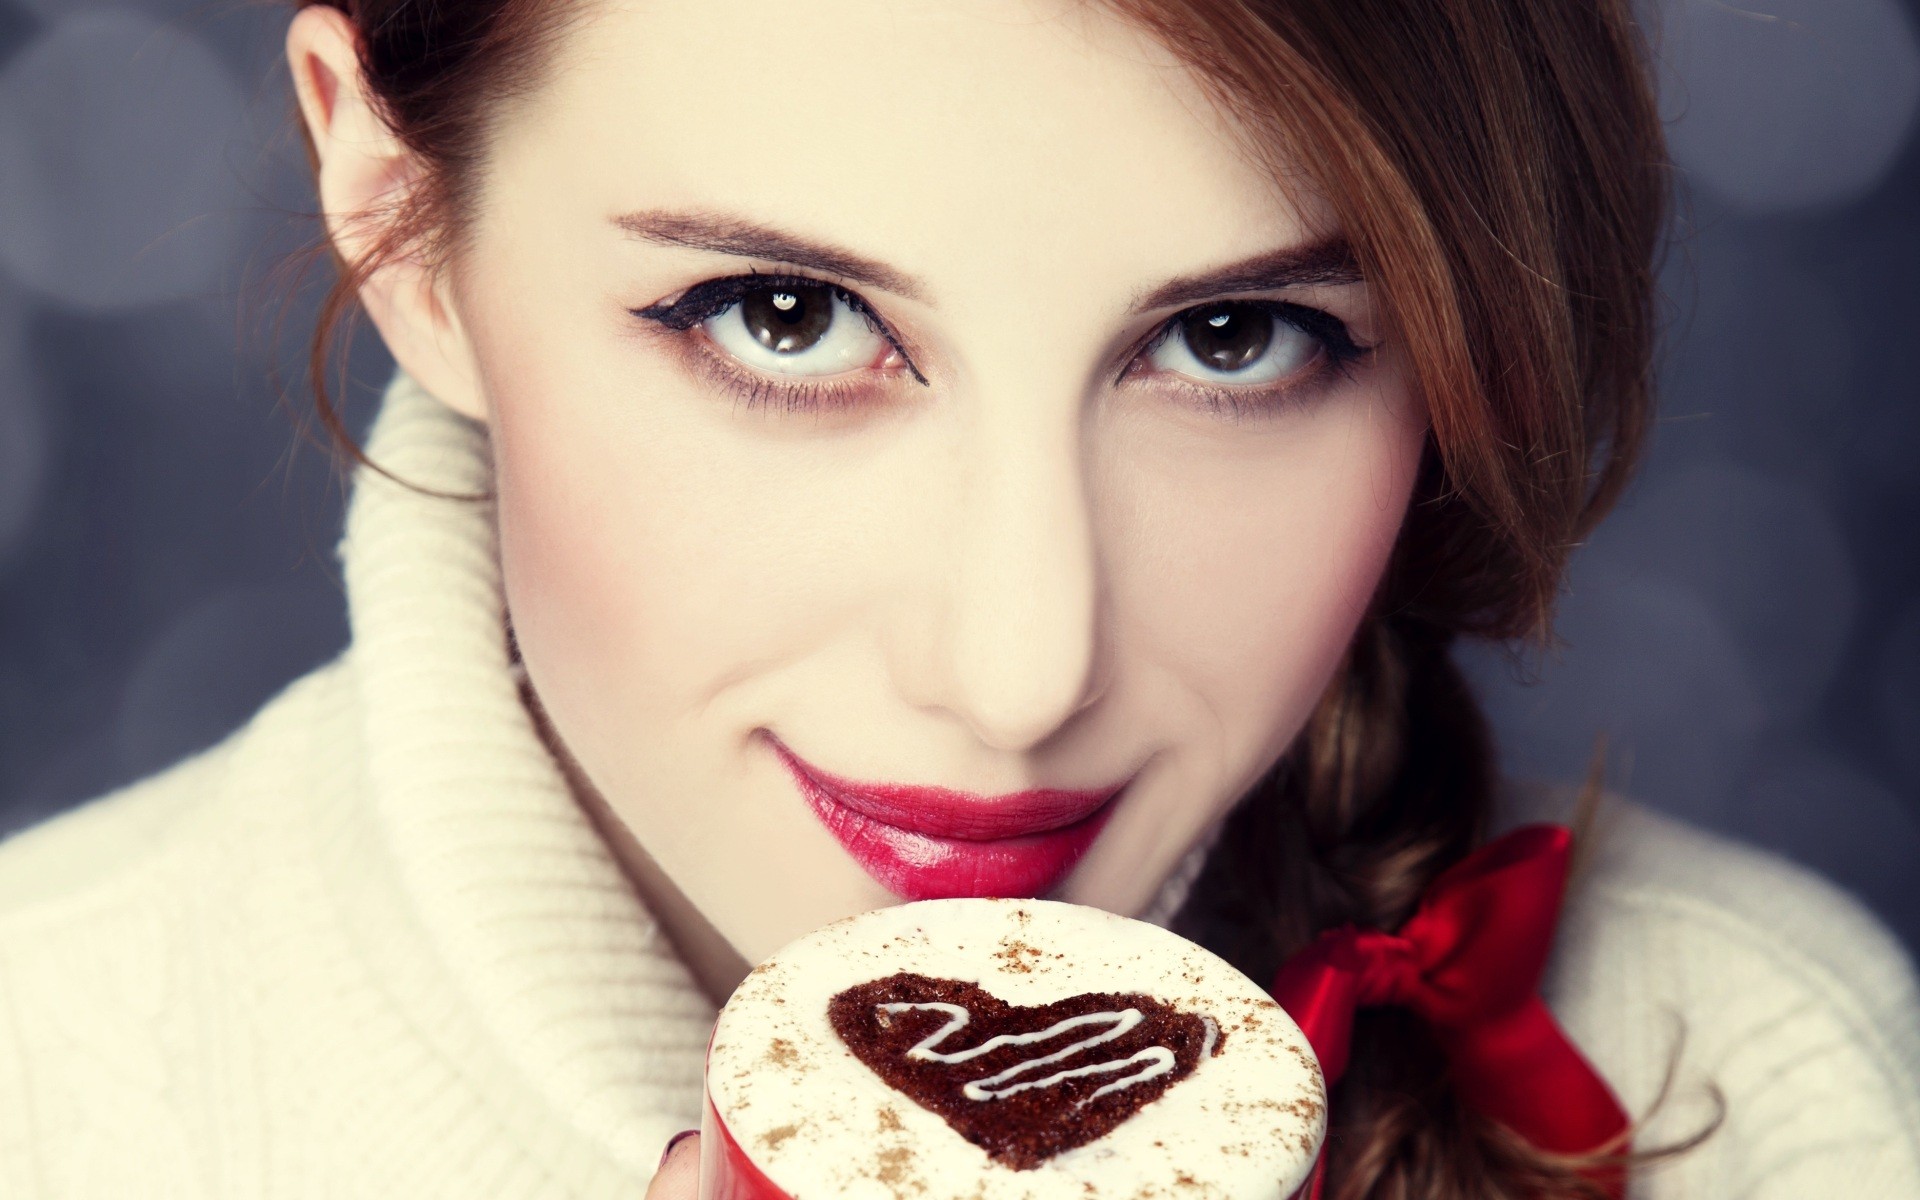 People 1920x1200 women brunette face sweater dark eyes smiling Emma Roberts actress red lipstick looking at viewer food sweets makeup women indoors indoors